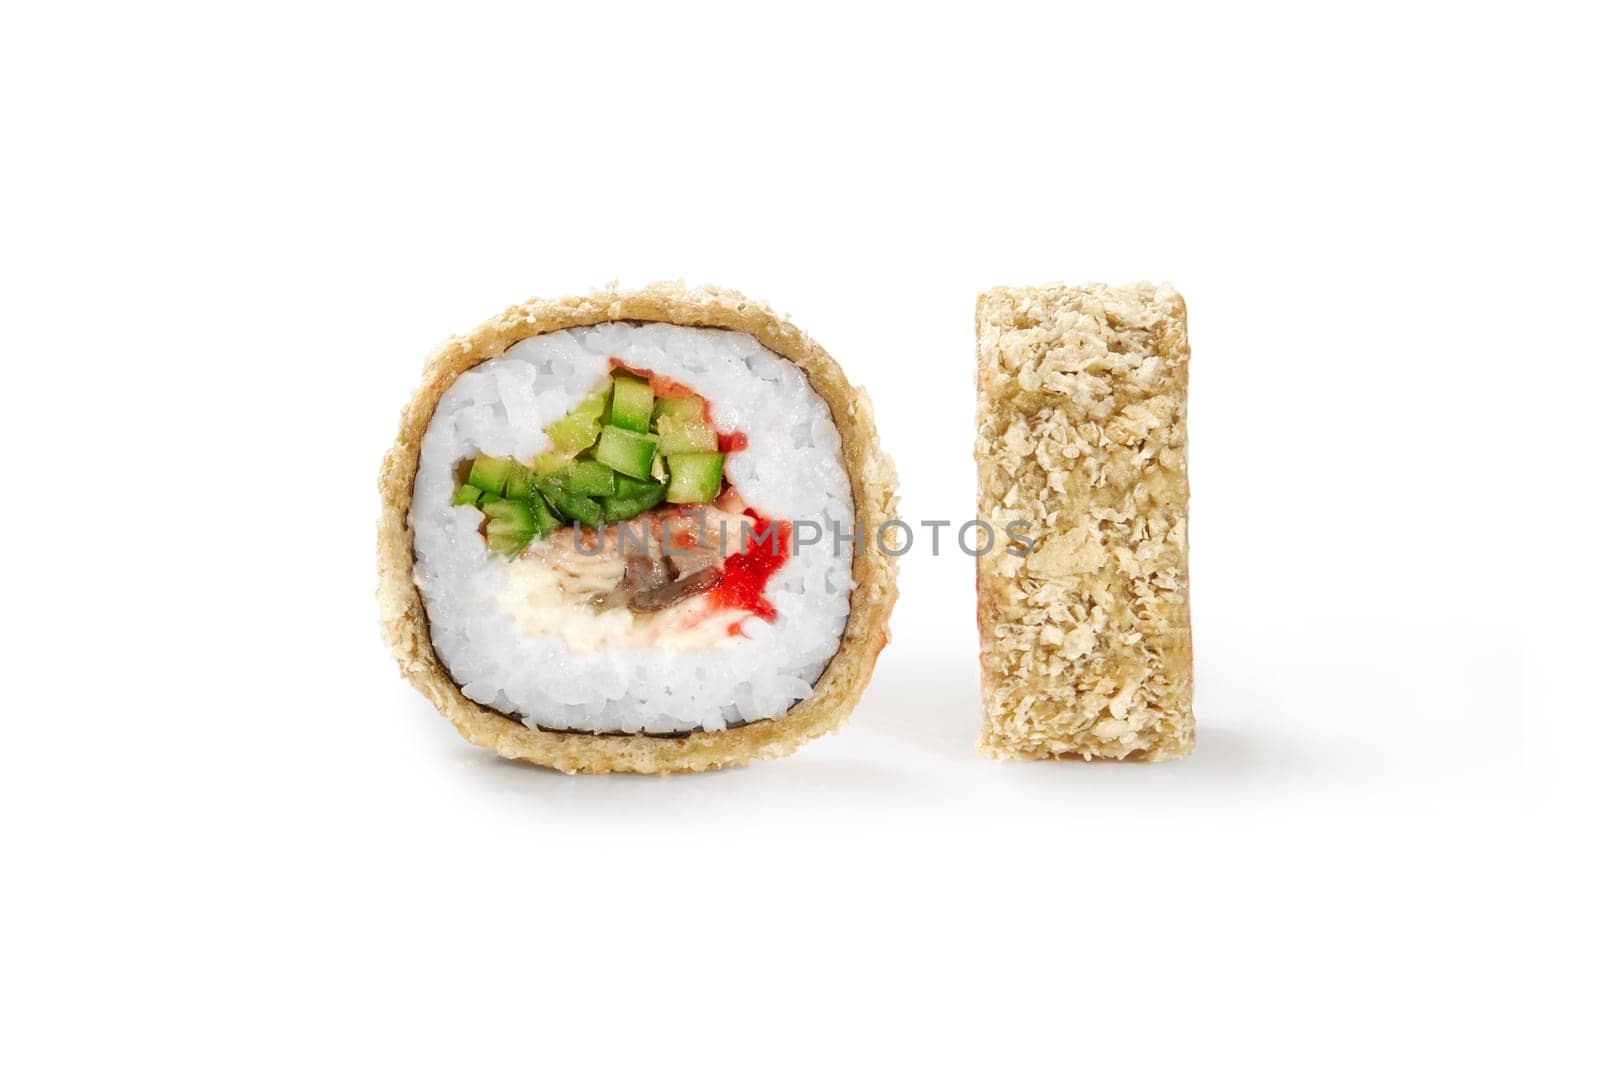 Warm crispy deep-fried sushi roll filled with eel, masago, cream cheese and cucumbers wrapped in panko breadcrumbs, displayed isolated on white background. Popular Japanese style food